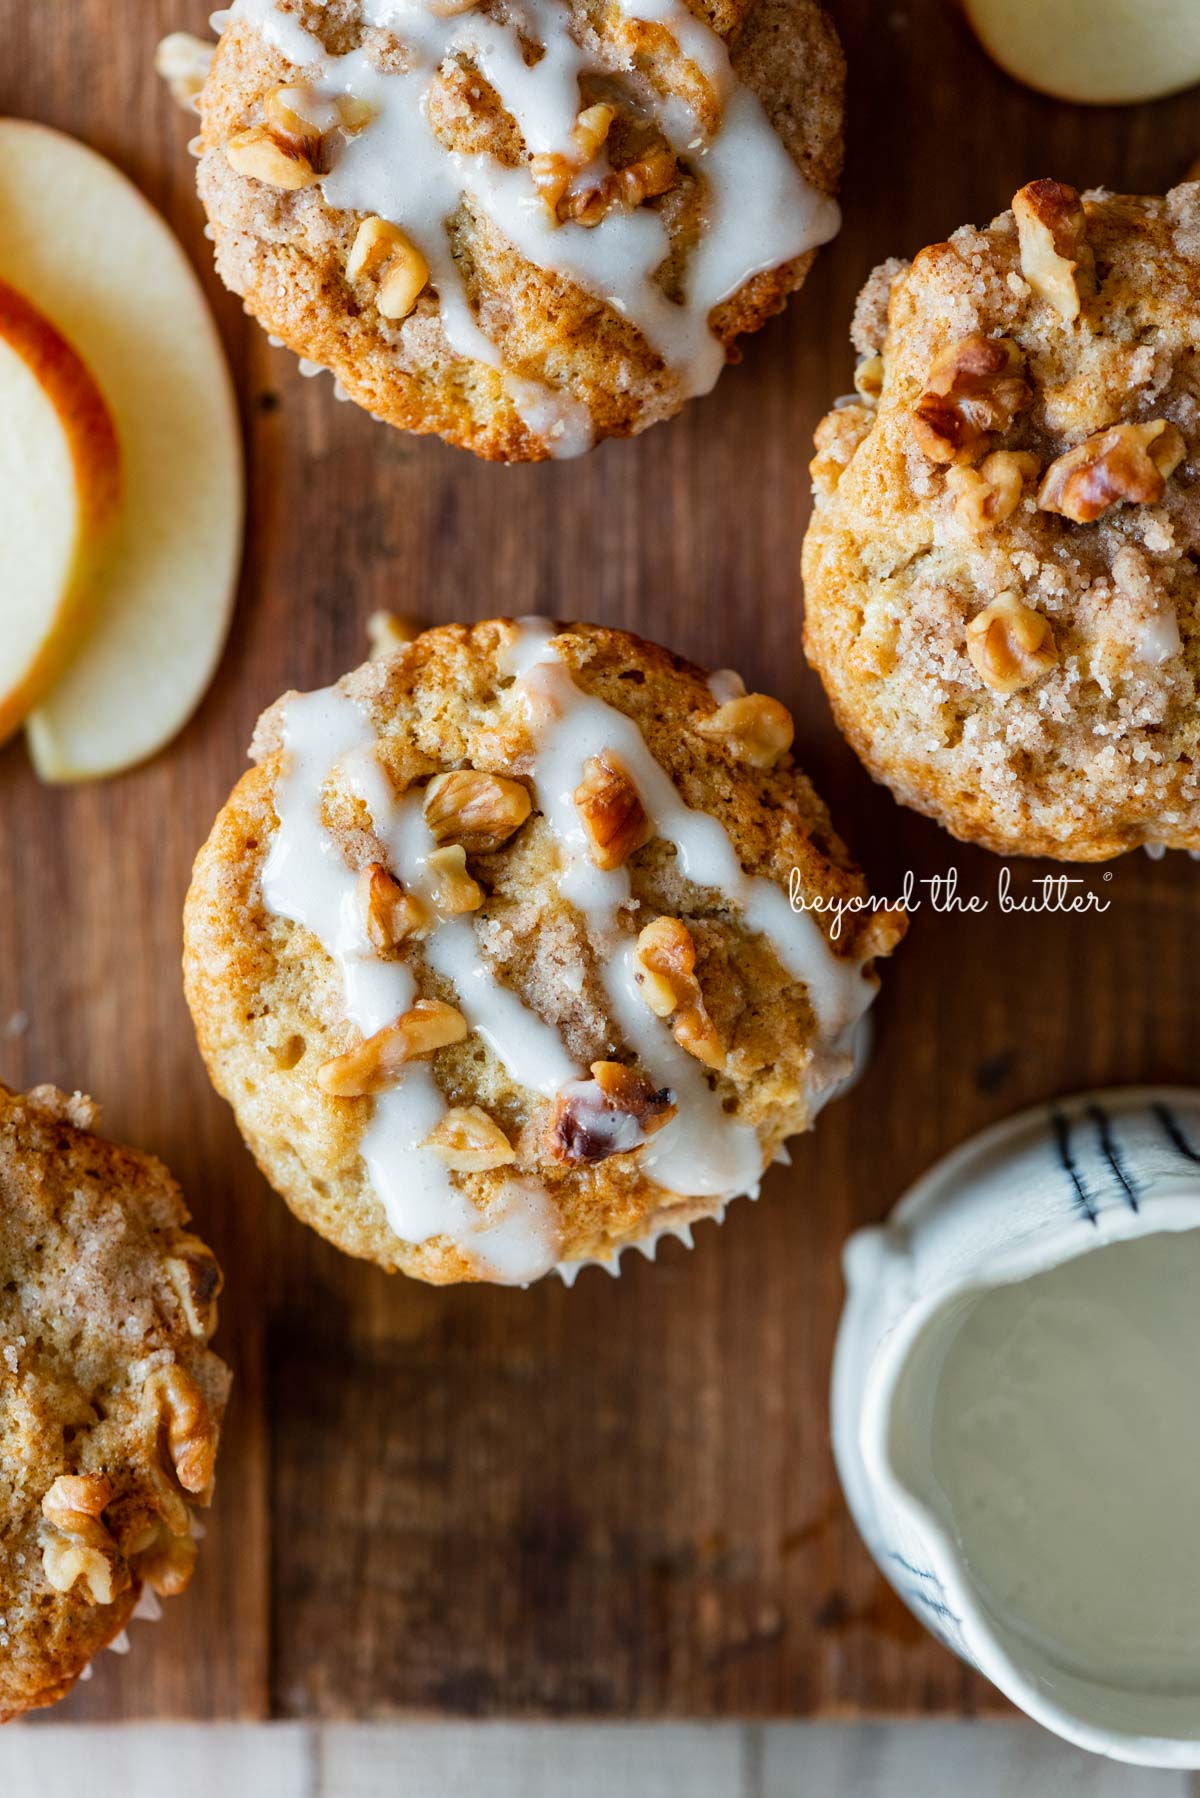 Warm apple cinnamon streusel muffins on a wood cutting board with slices of apples and vanilla glaze | © Beyond the Butter®